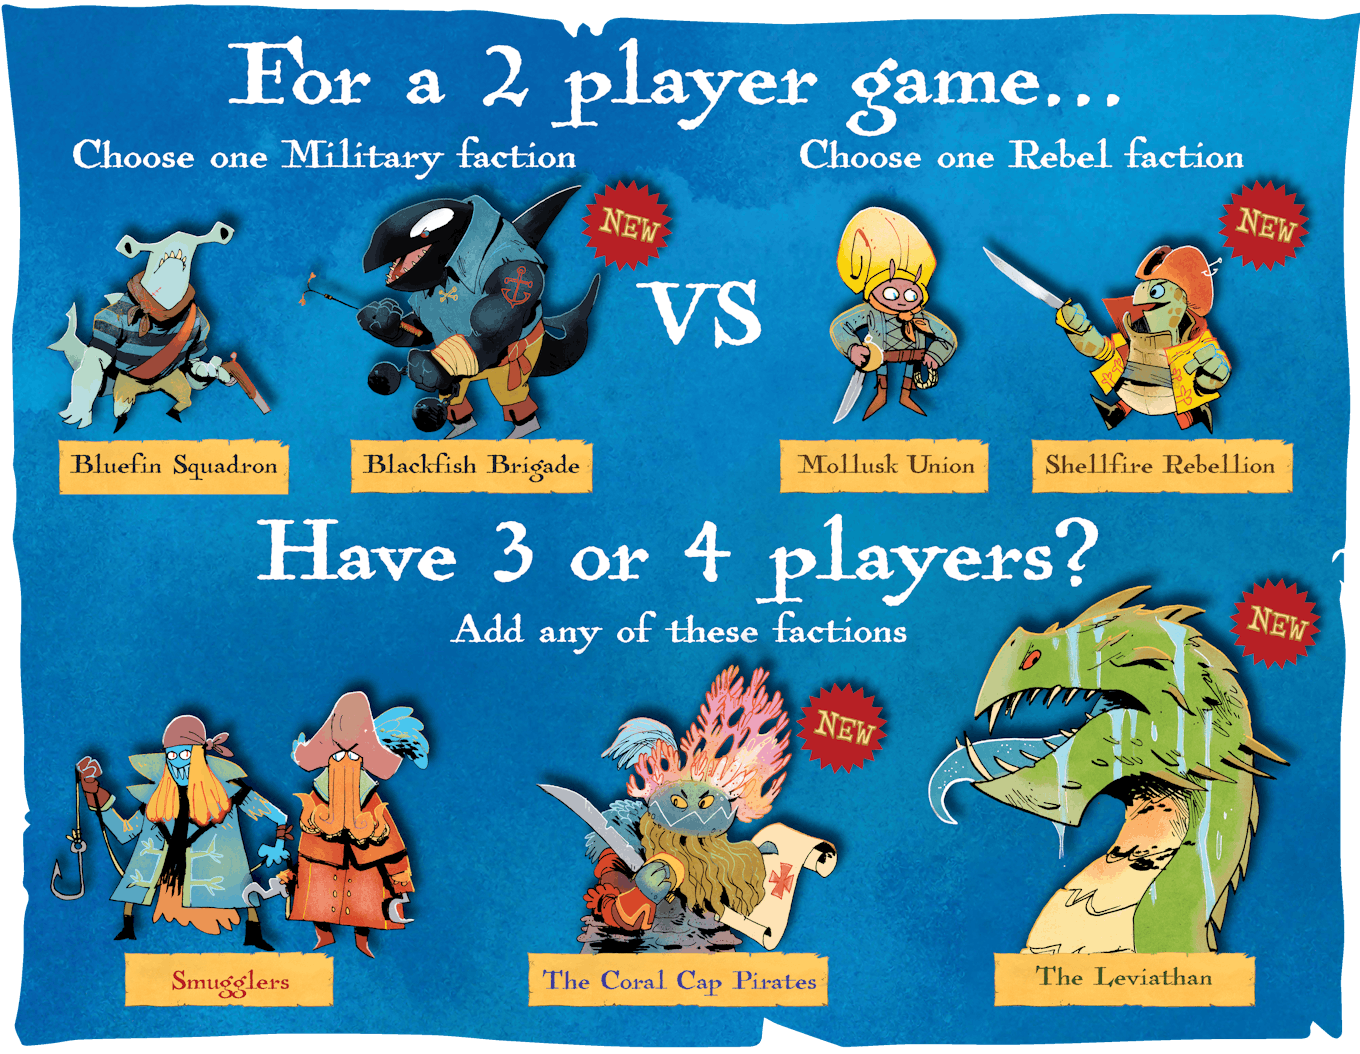 Play combination graphic highlighting the two Military and Rebel factions for 2 players, as well as the 3 colorless factions available for 3 and 4 player games.